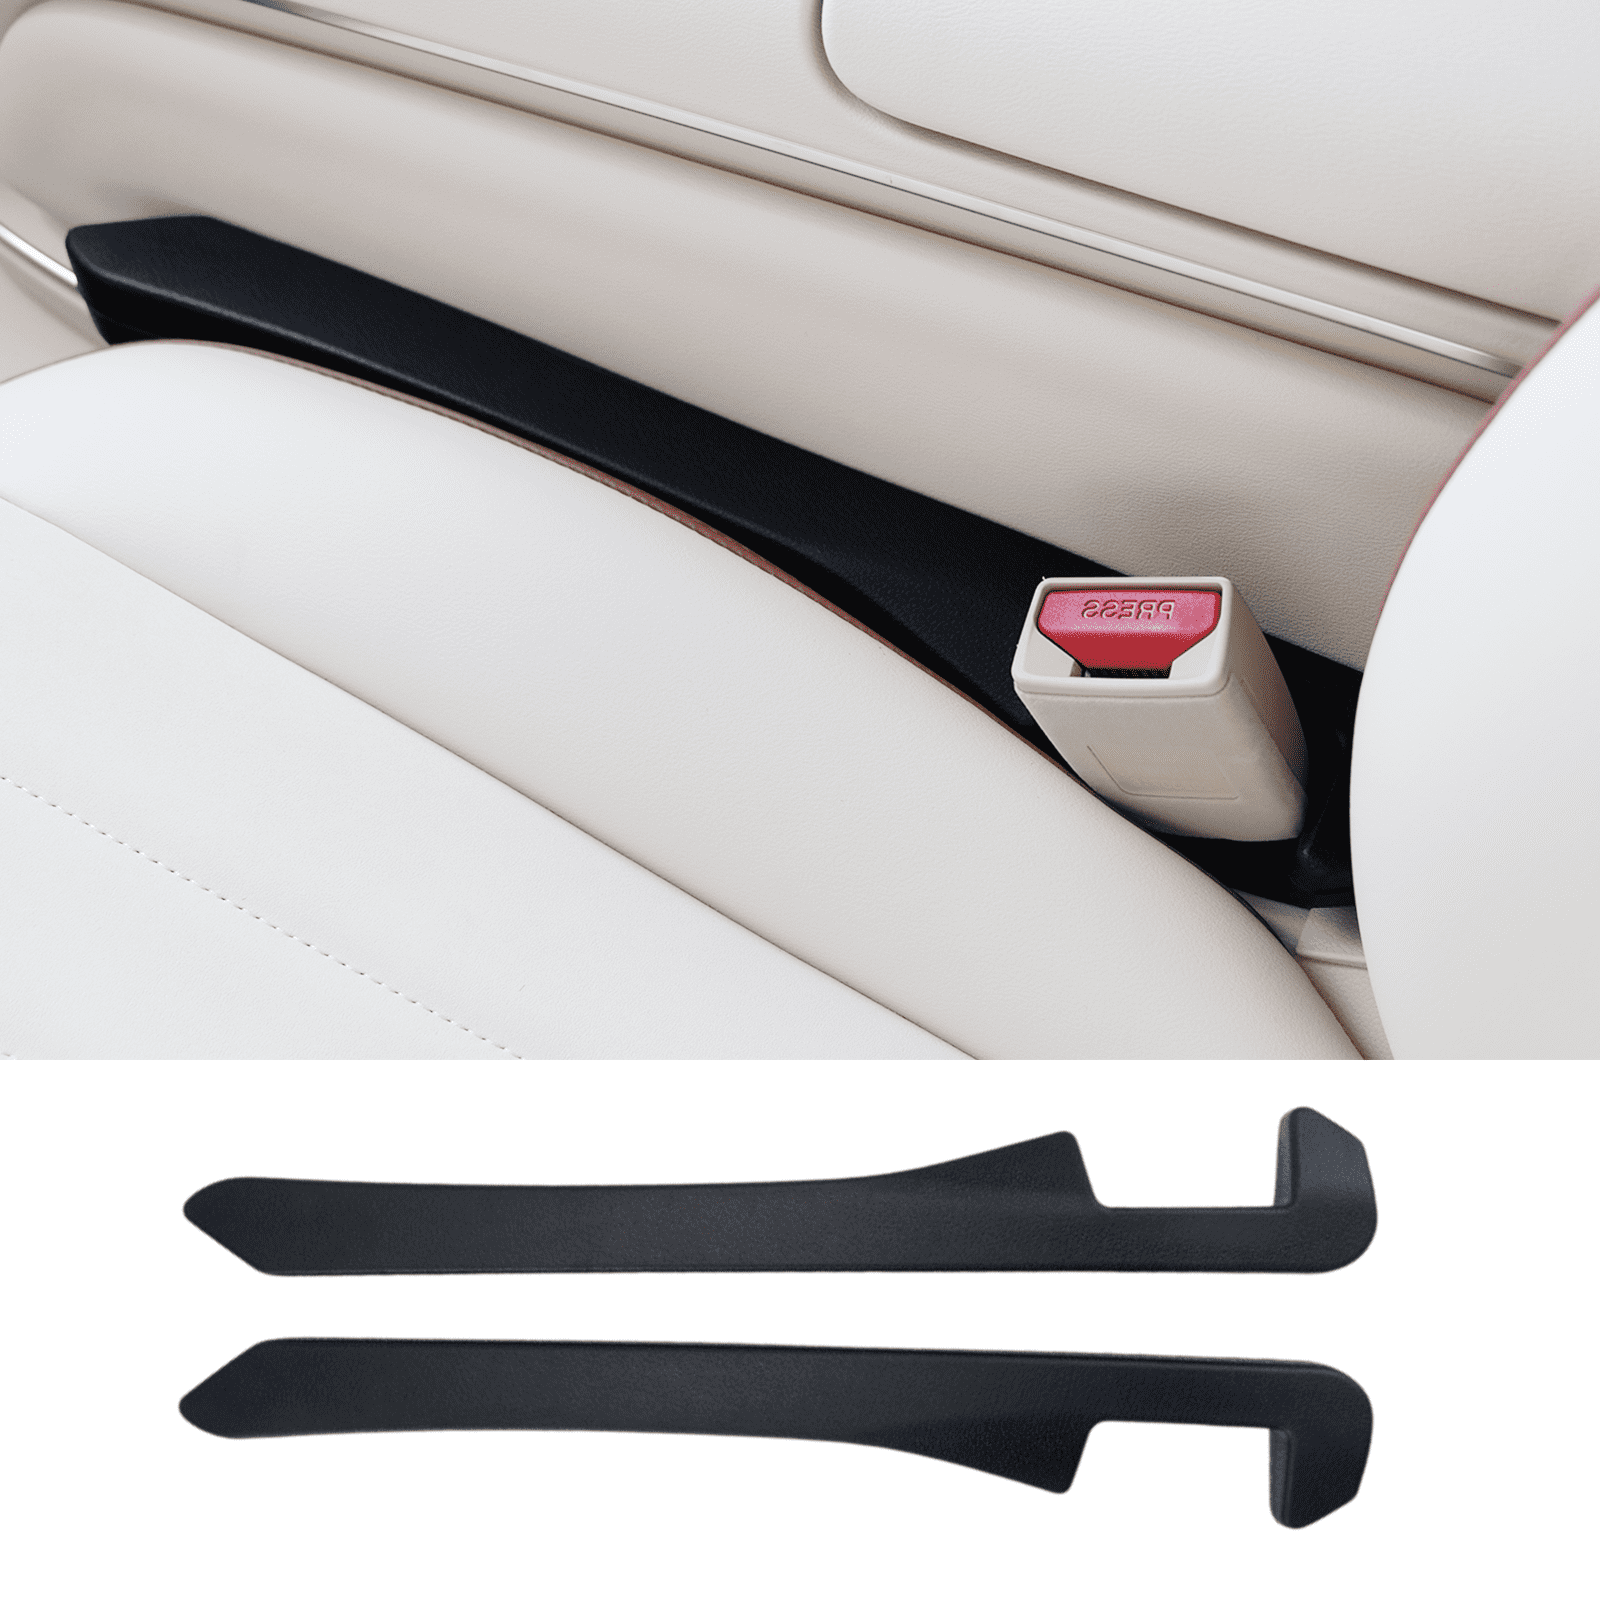 Berylins 2 Pack Car Seat Gap Filler Plug Strip Universal for Car, SUV and  Truck, PU Leather Auto Side Seat Crevice Catcher Blocker Fill Gap Between